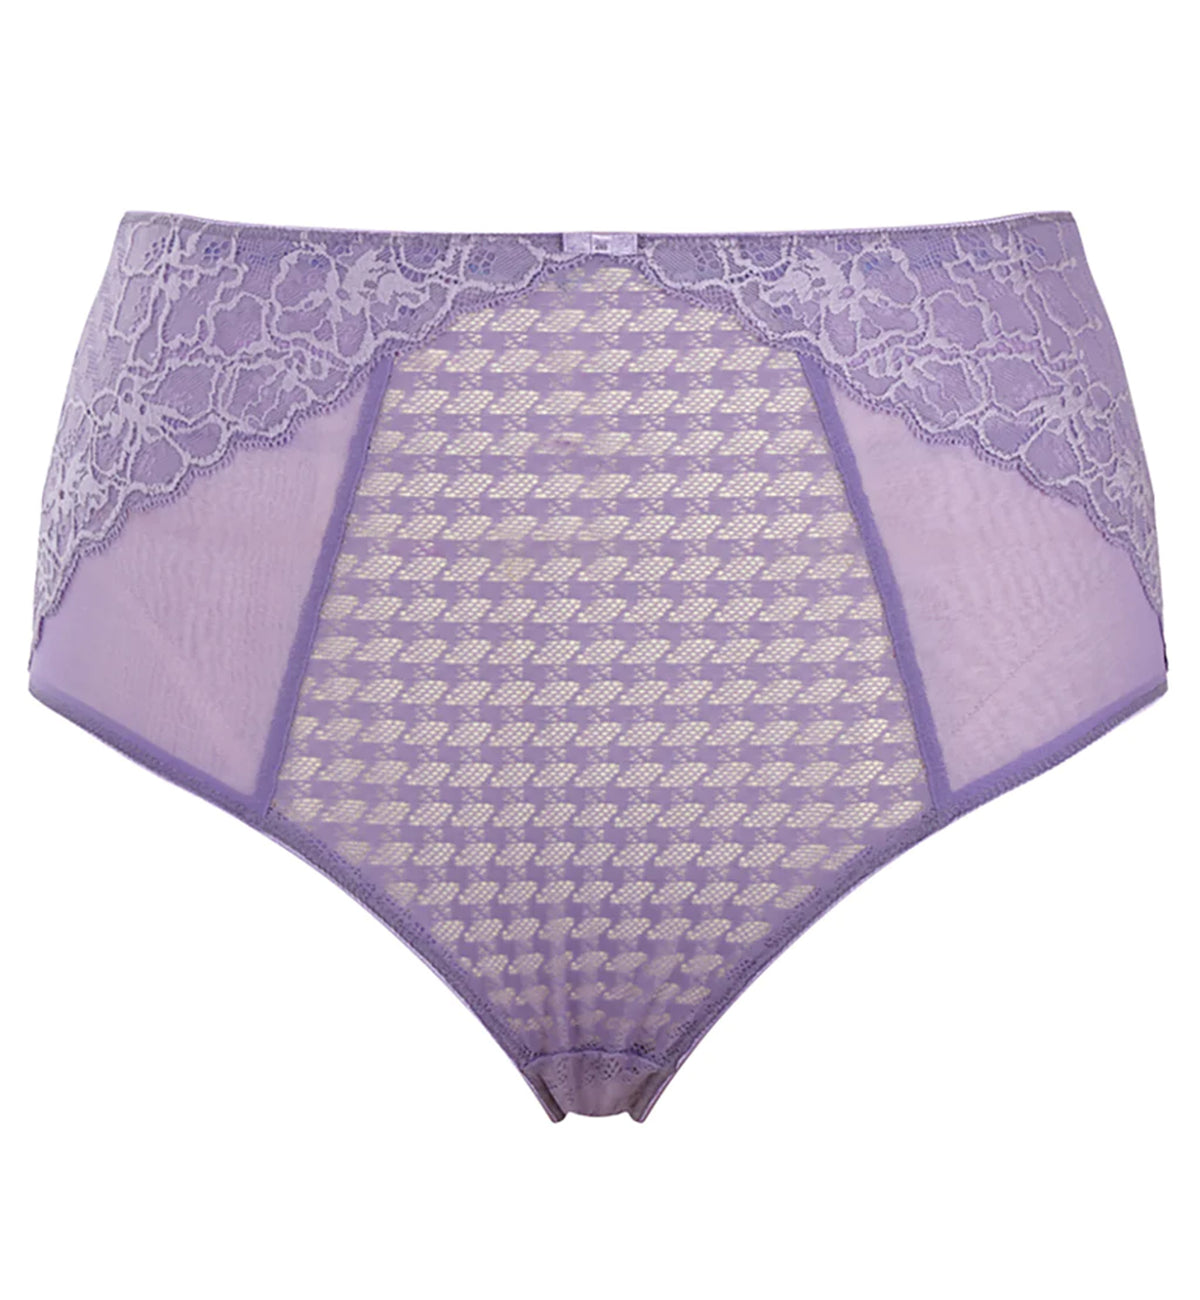 Panache Envy Matching Deep Brief (7283),Small,Violet - Violet,Small